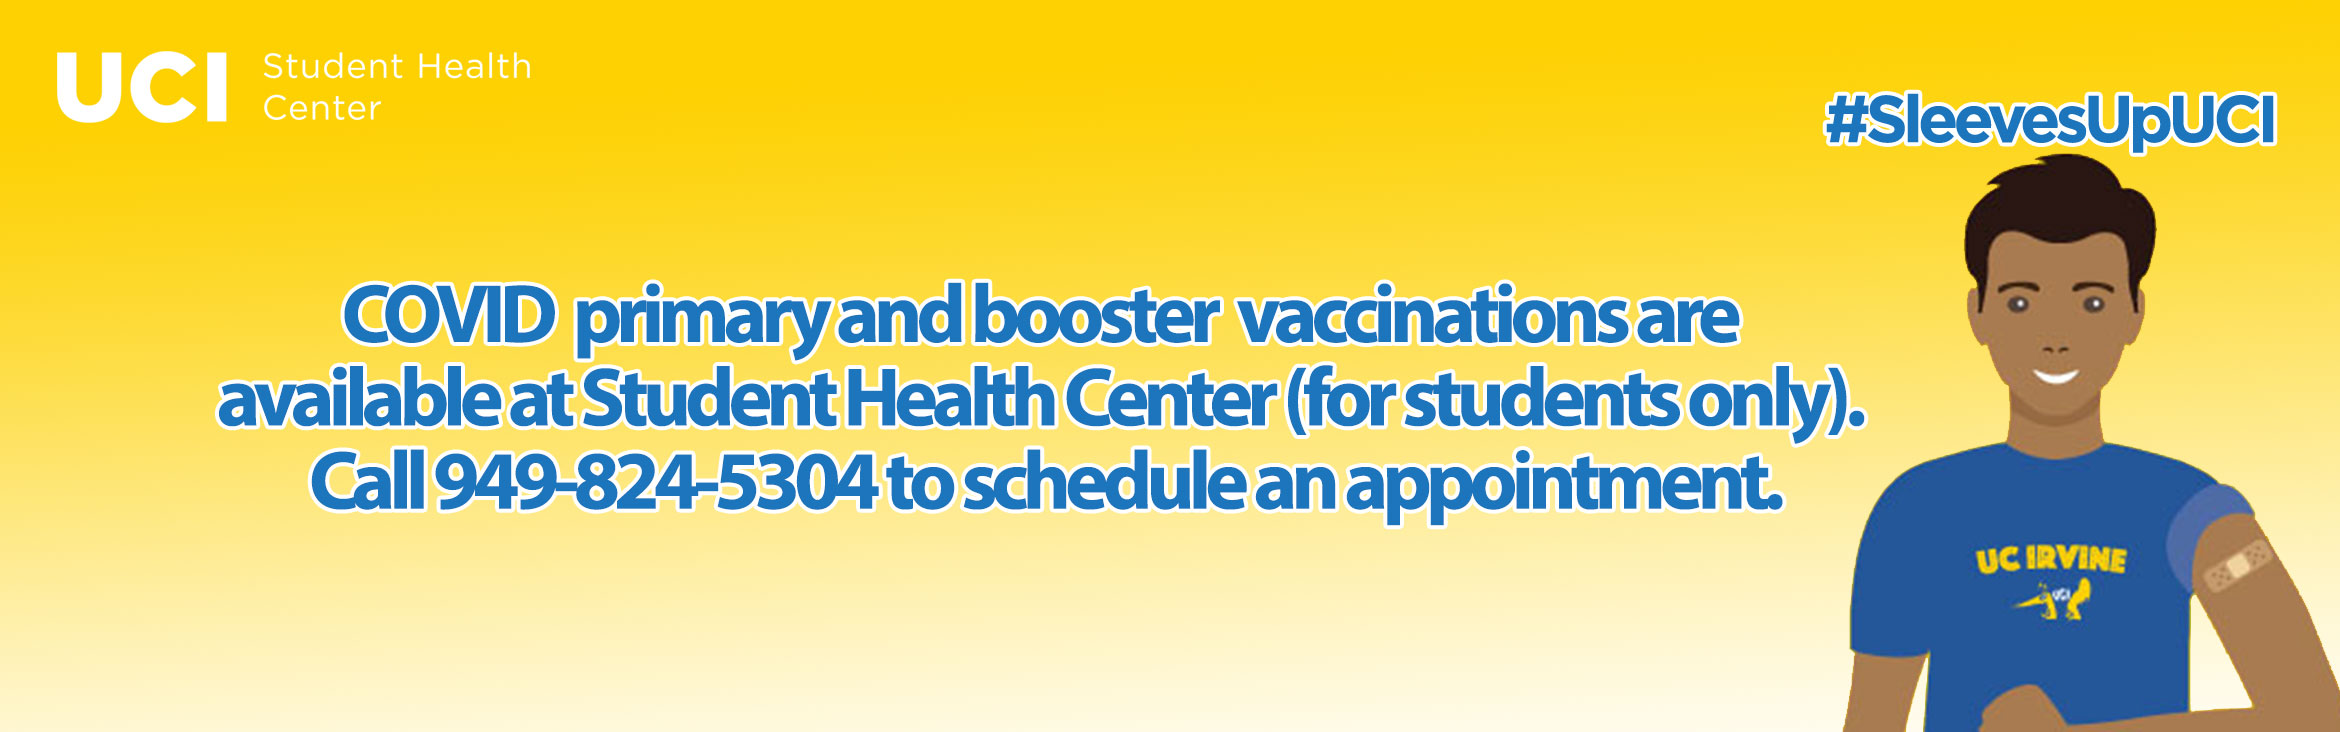 Covid primary and booster vaccinations are available at Student Health Center. ( For students only) Call today to book your appt. at (949) 824-5304